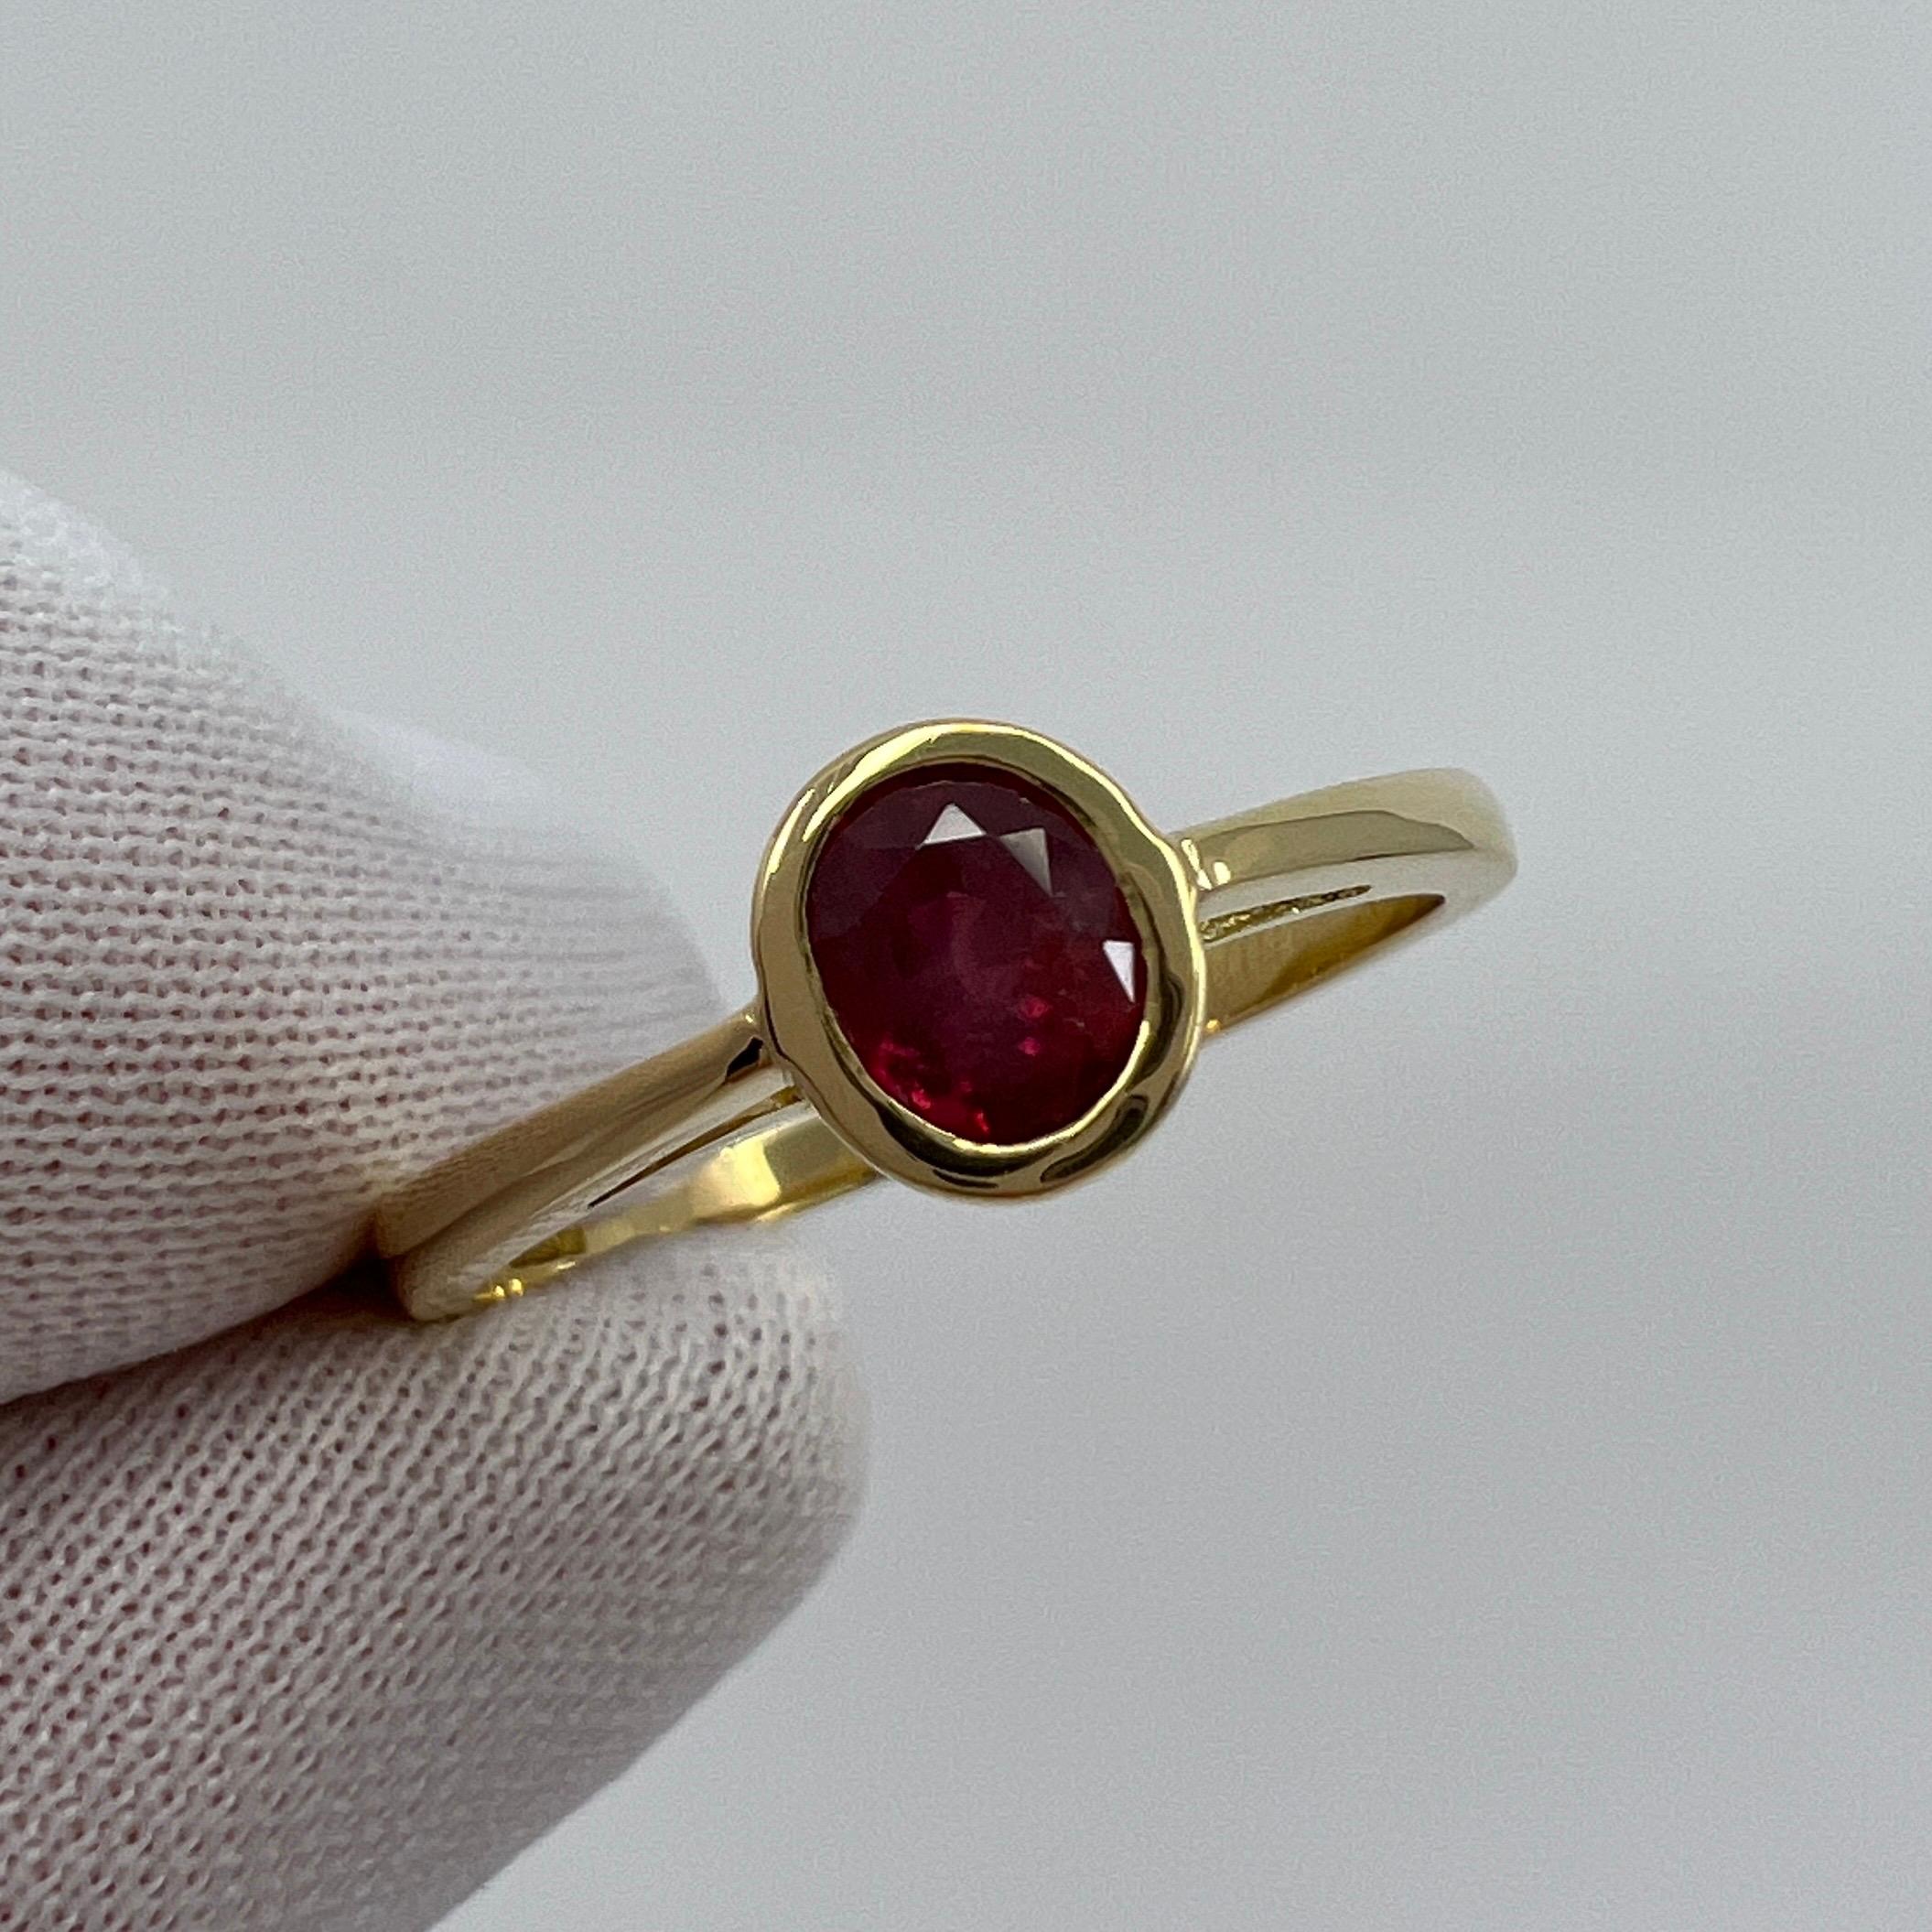 0.75ct Vivid Red Ruby Oval Cut 18k Yellow Gold Bezel Rubover Solitaire Ring For Sale 1